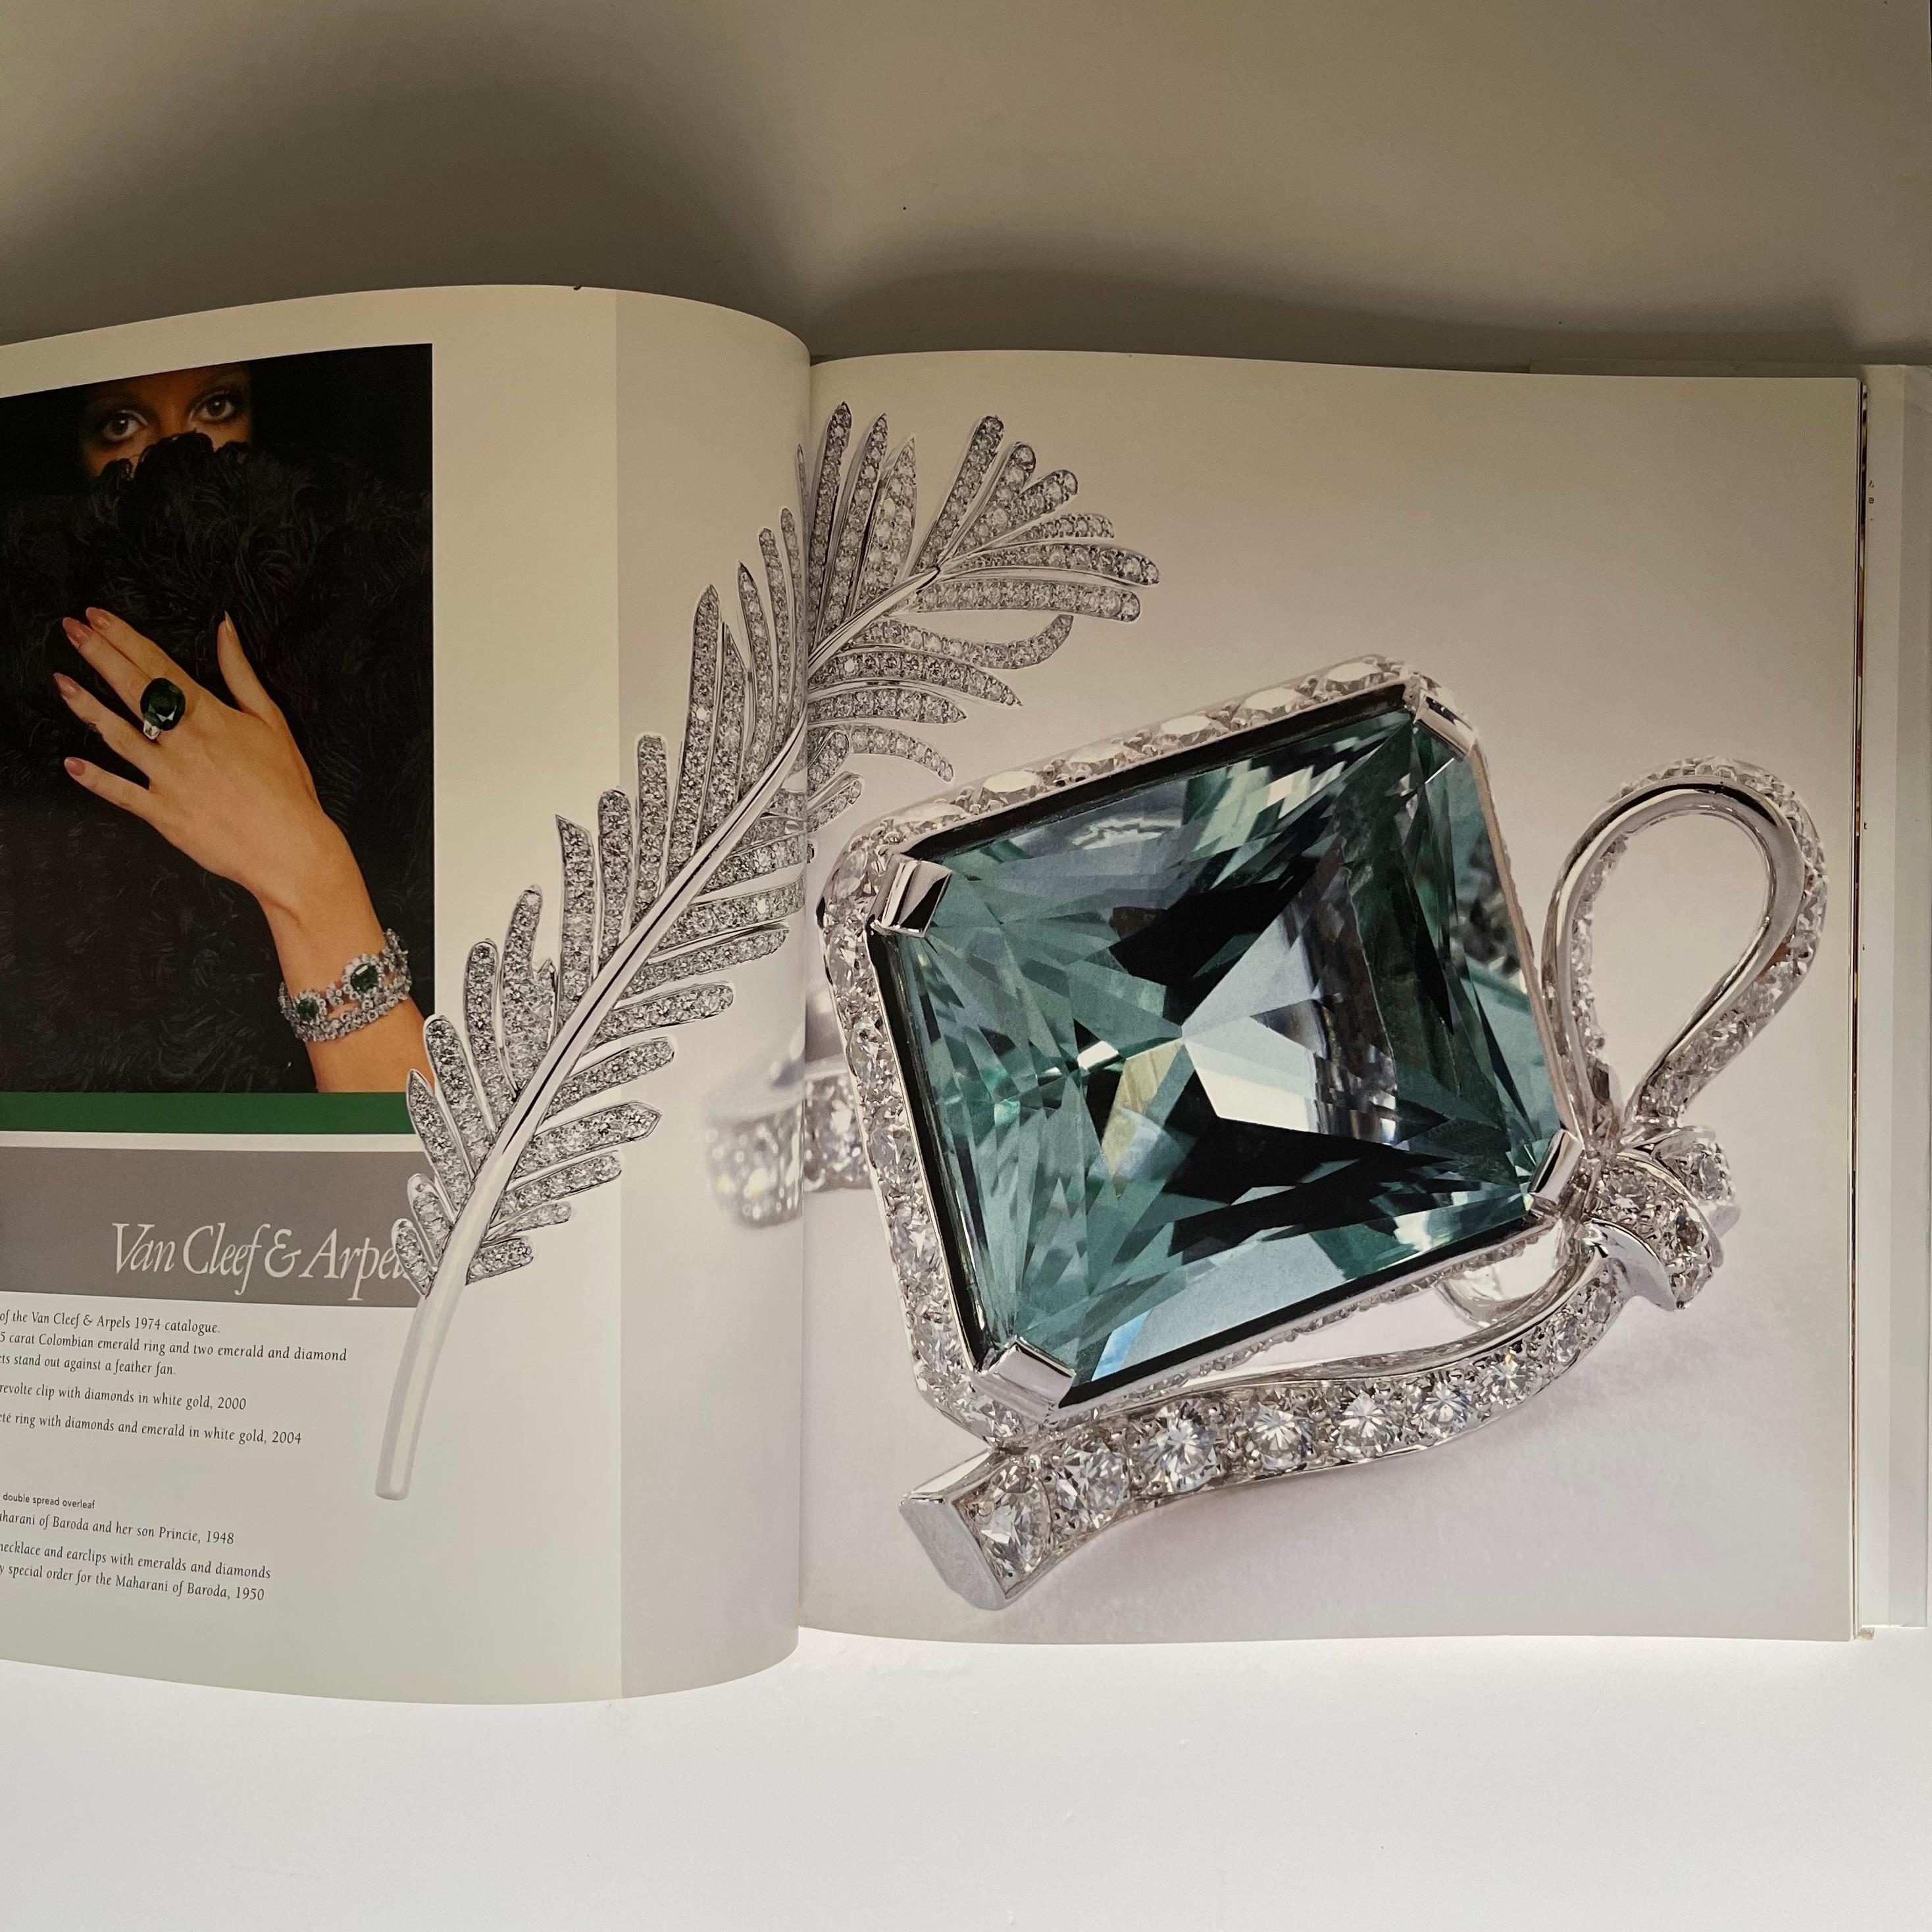 Van Cleef & Arpels Reflections of Eternity 1st Edition 2006 6